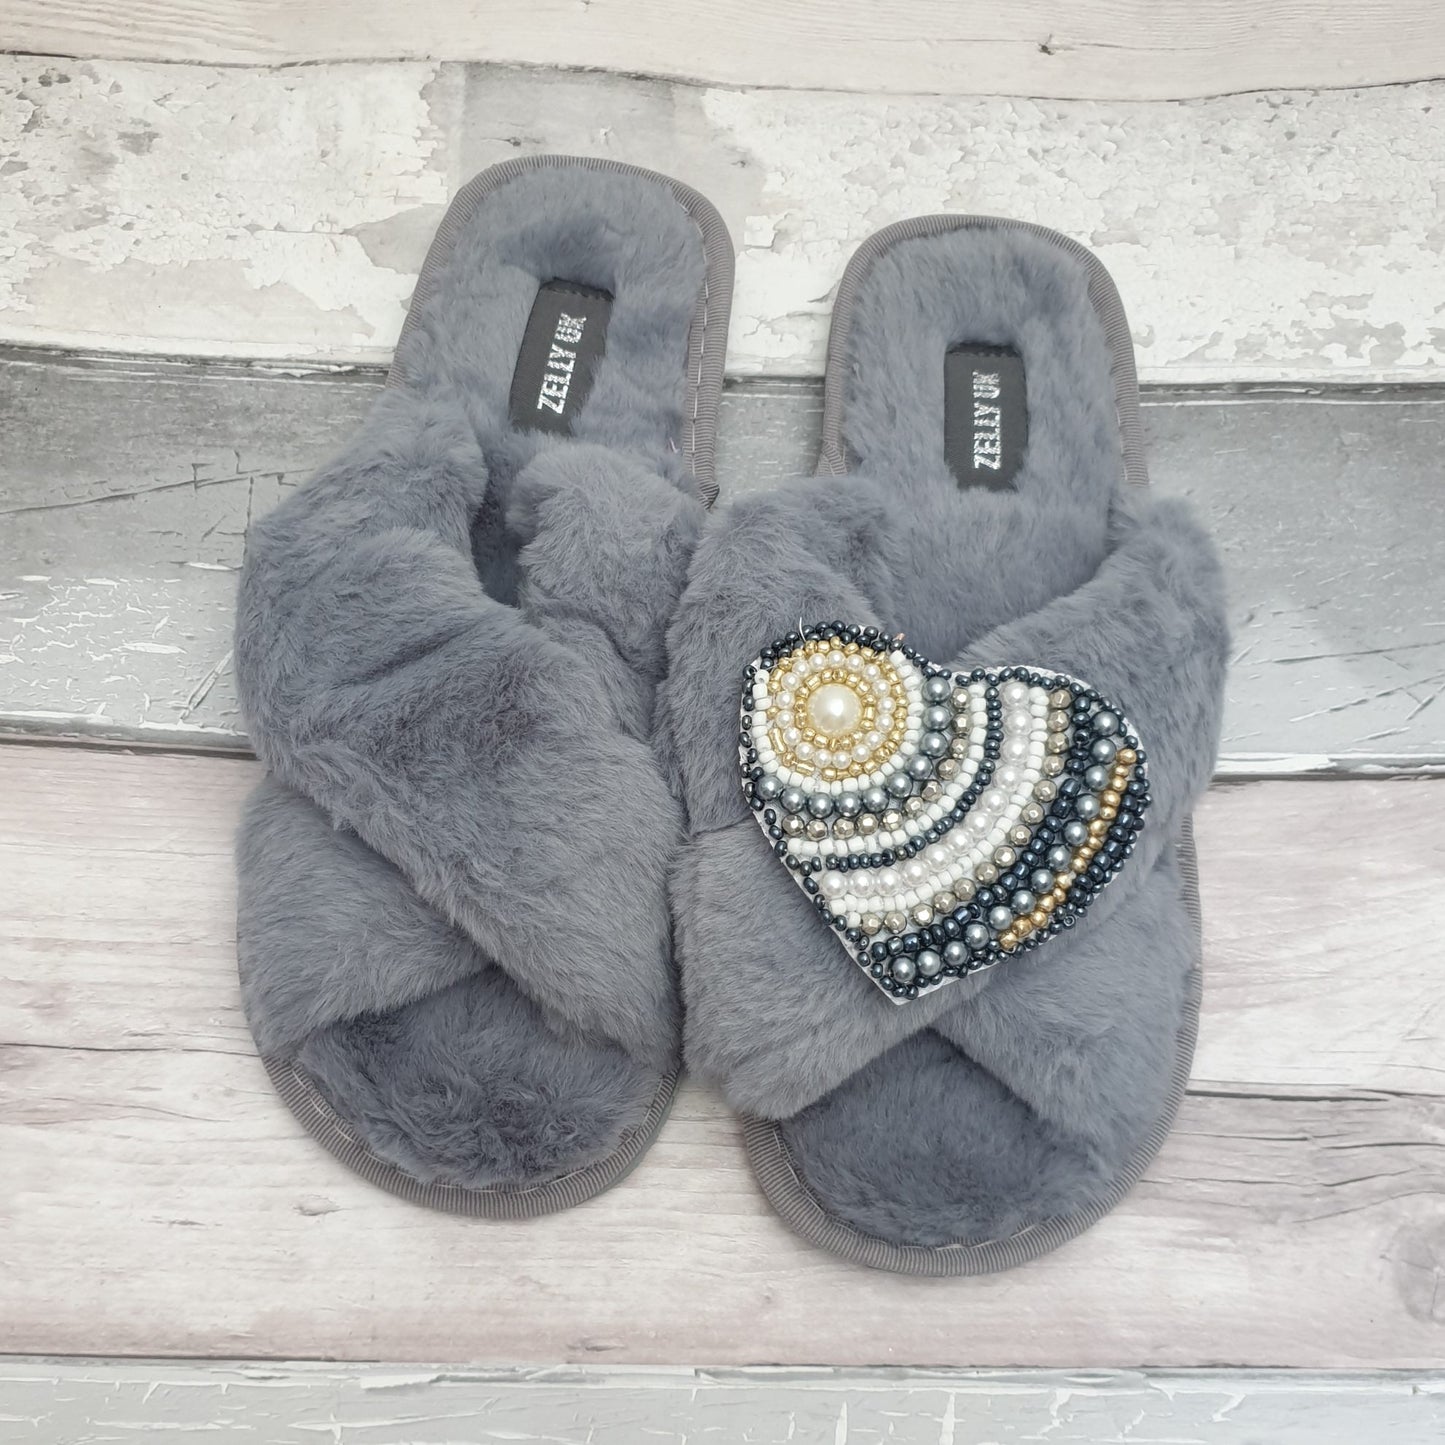 Fluffy grey slippers with a heart shaped brooch covered in sequins and beads